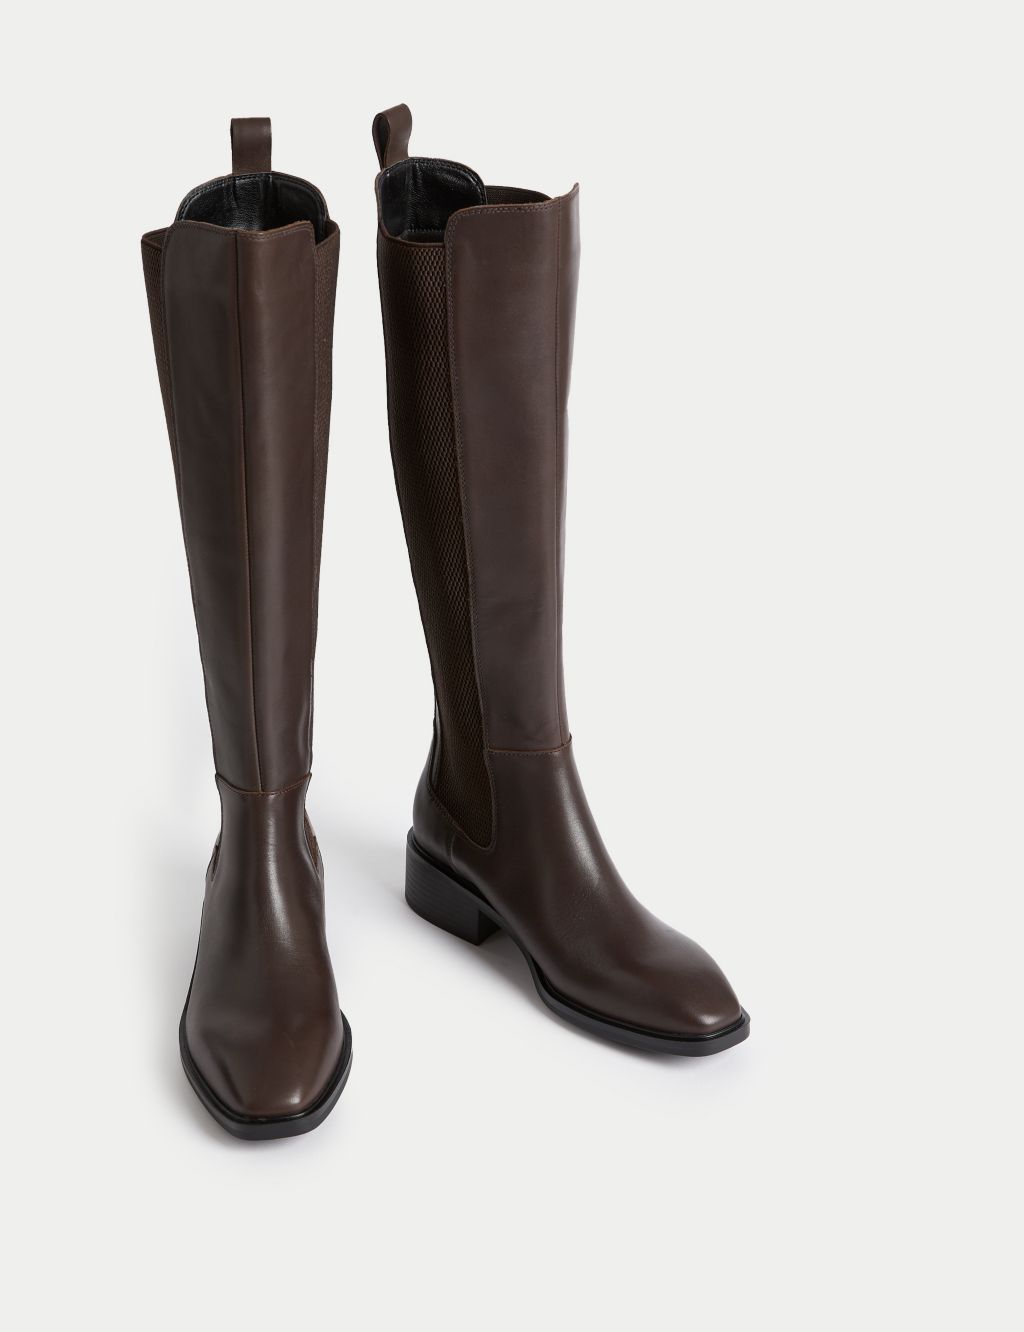 Leather Chelsea Flat Knee High Boots image 2